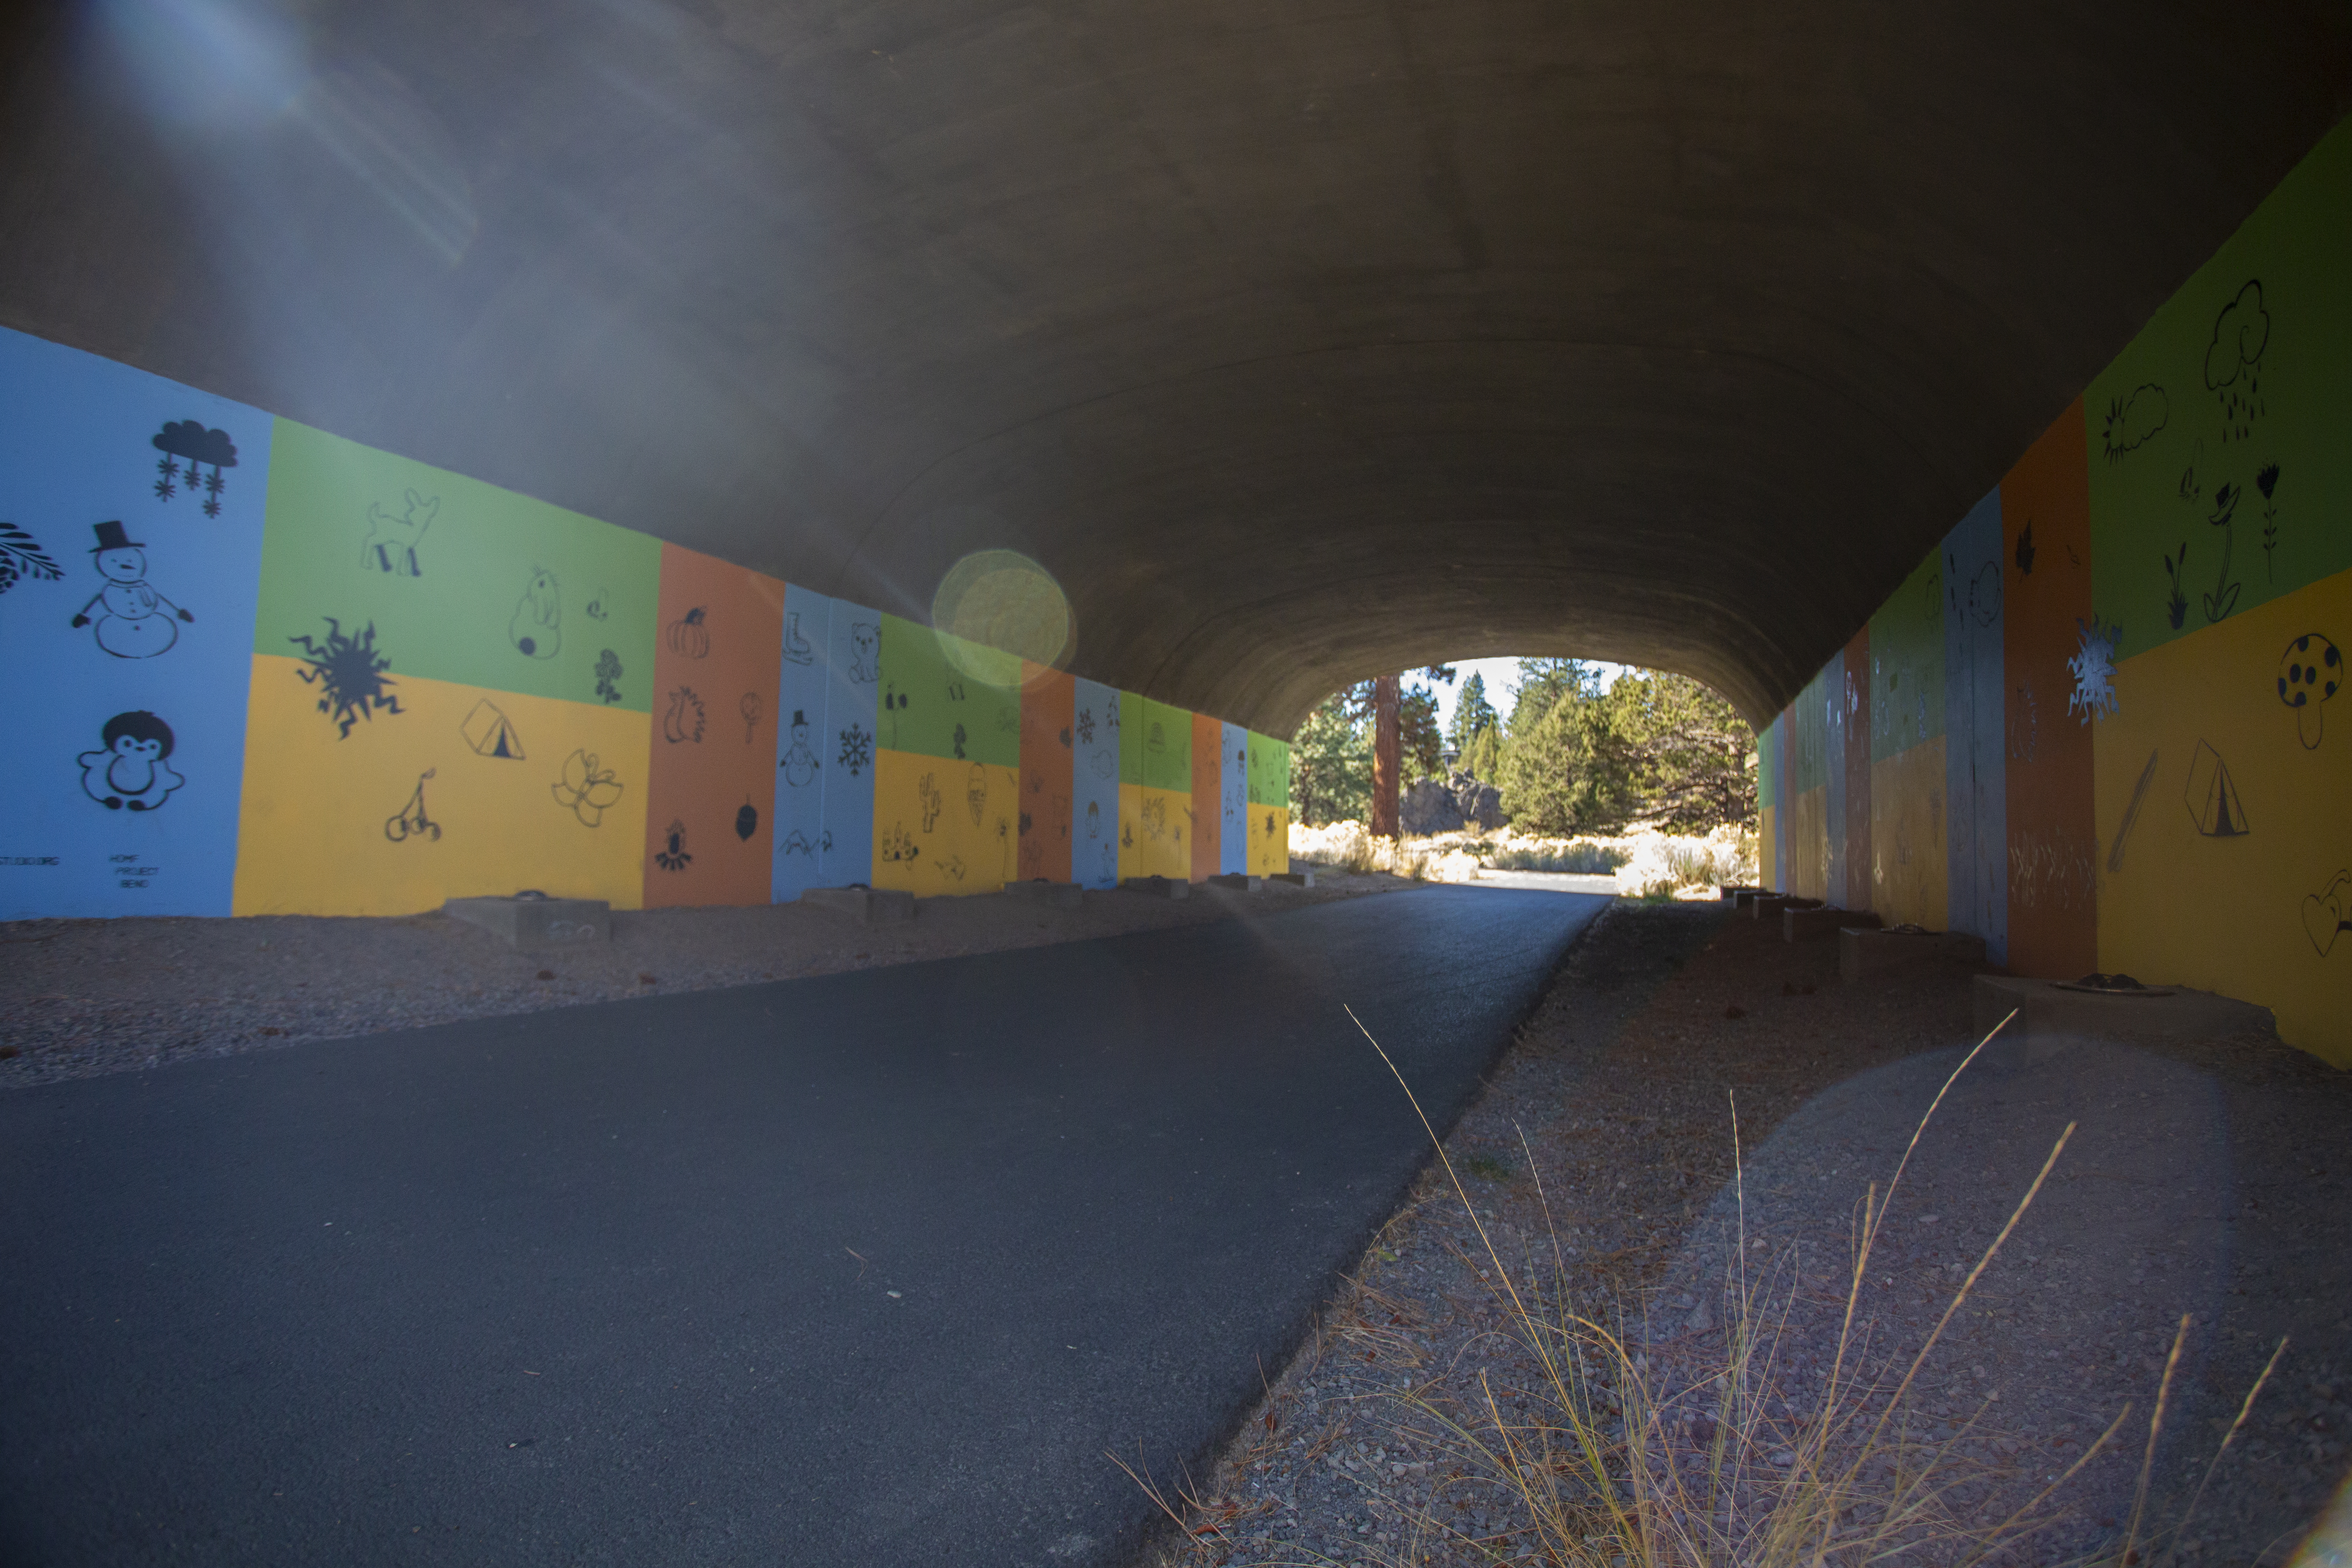 A road underpass for the West Bend trail